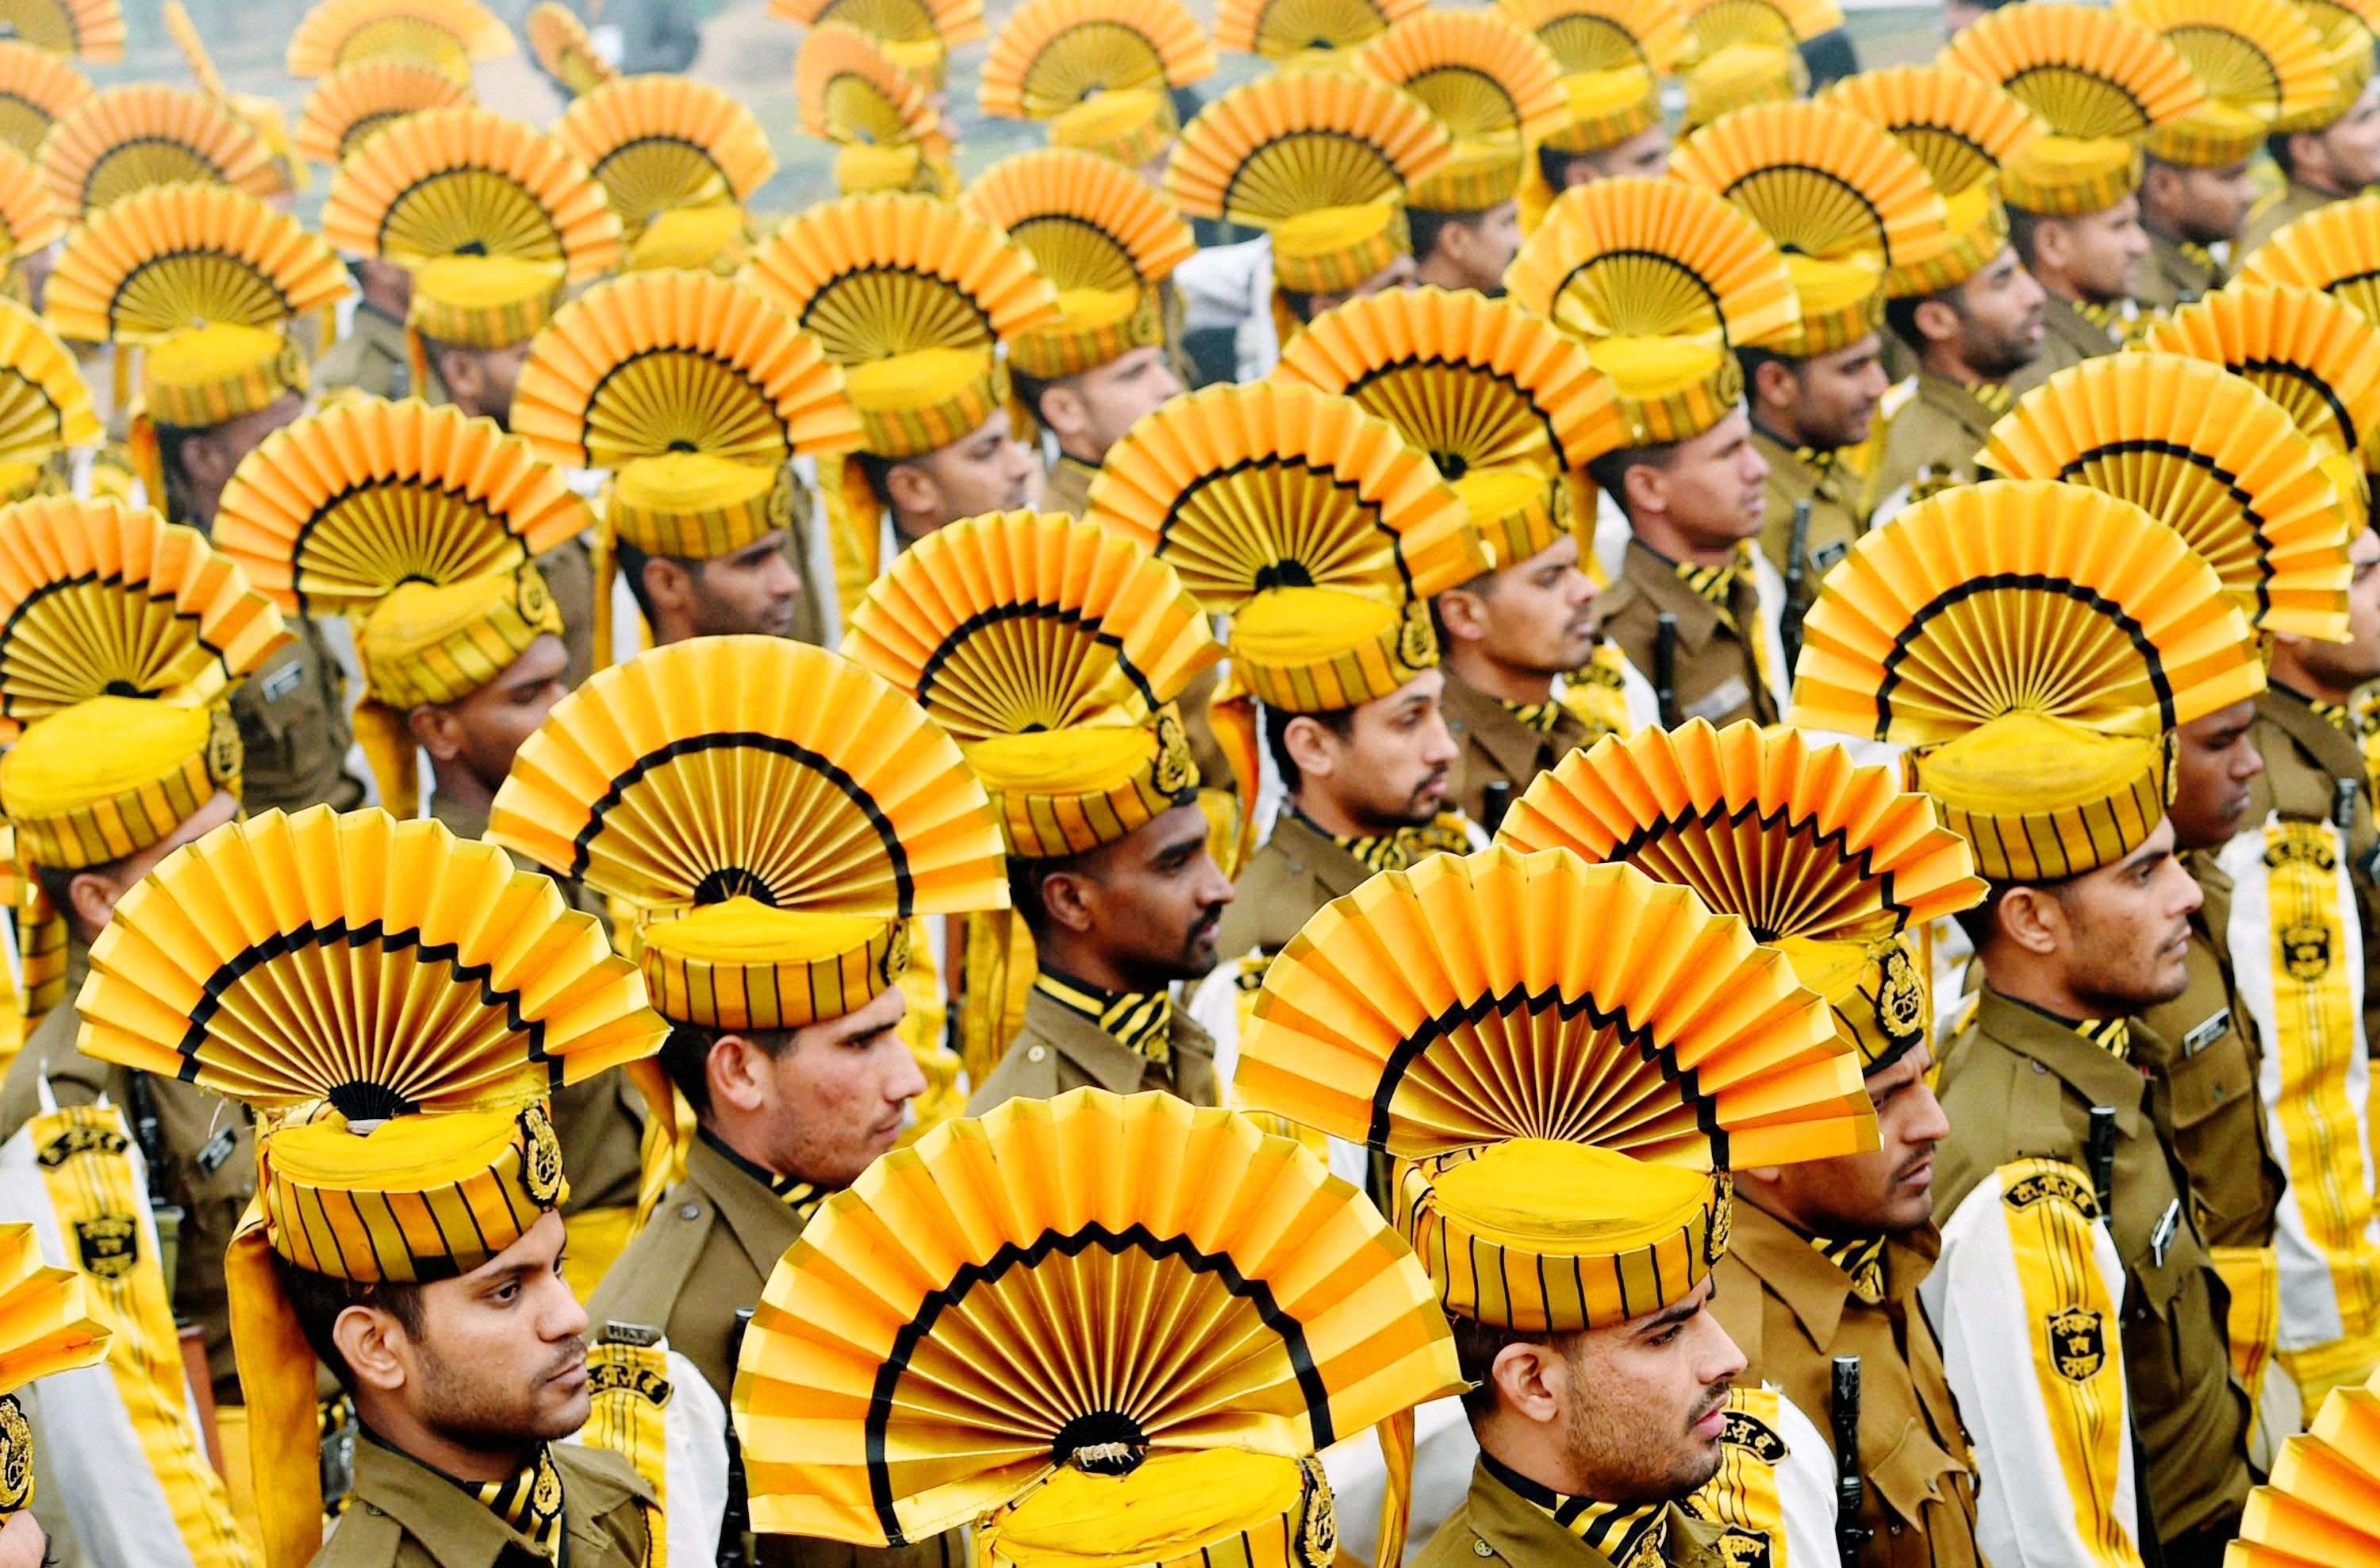 Army Jawans during the rehearsal for the Republic Day parade in New Delhi. (PTI photo by Shahbaz Khan)